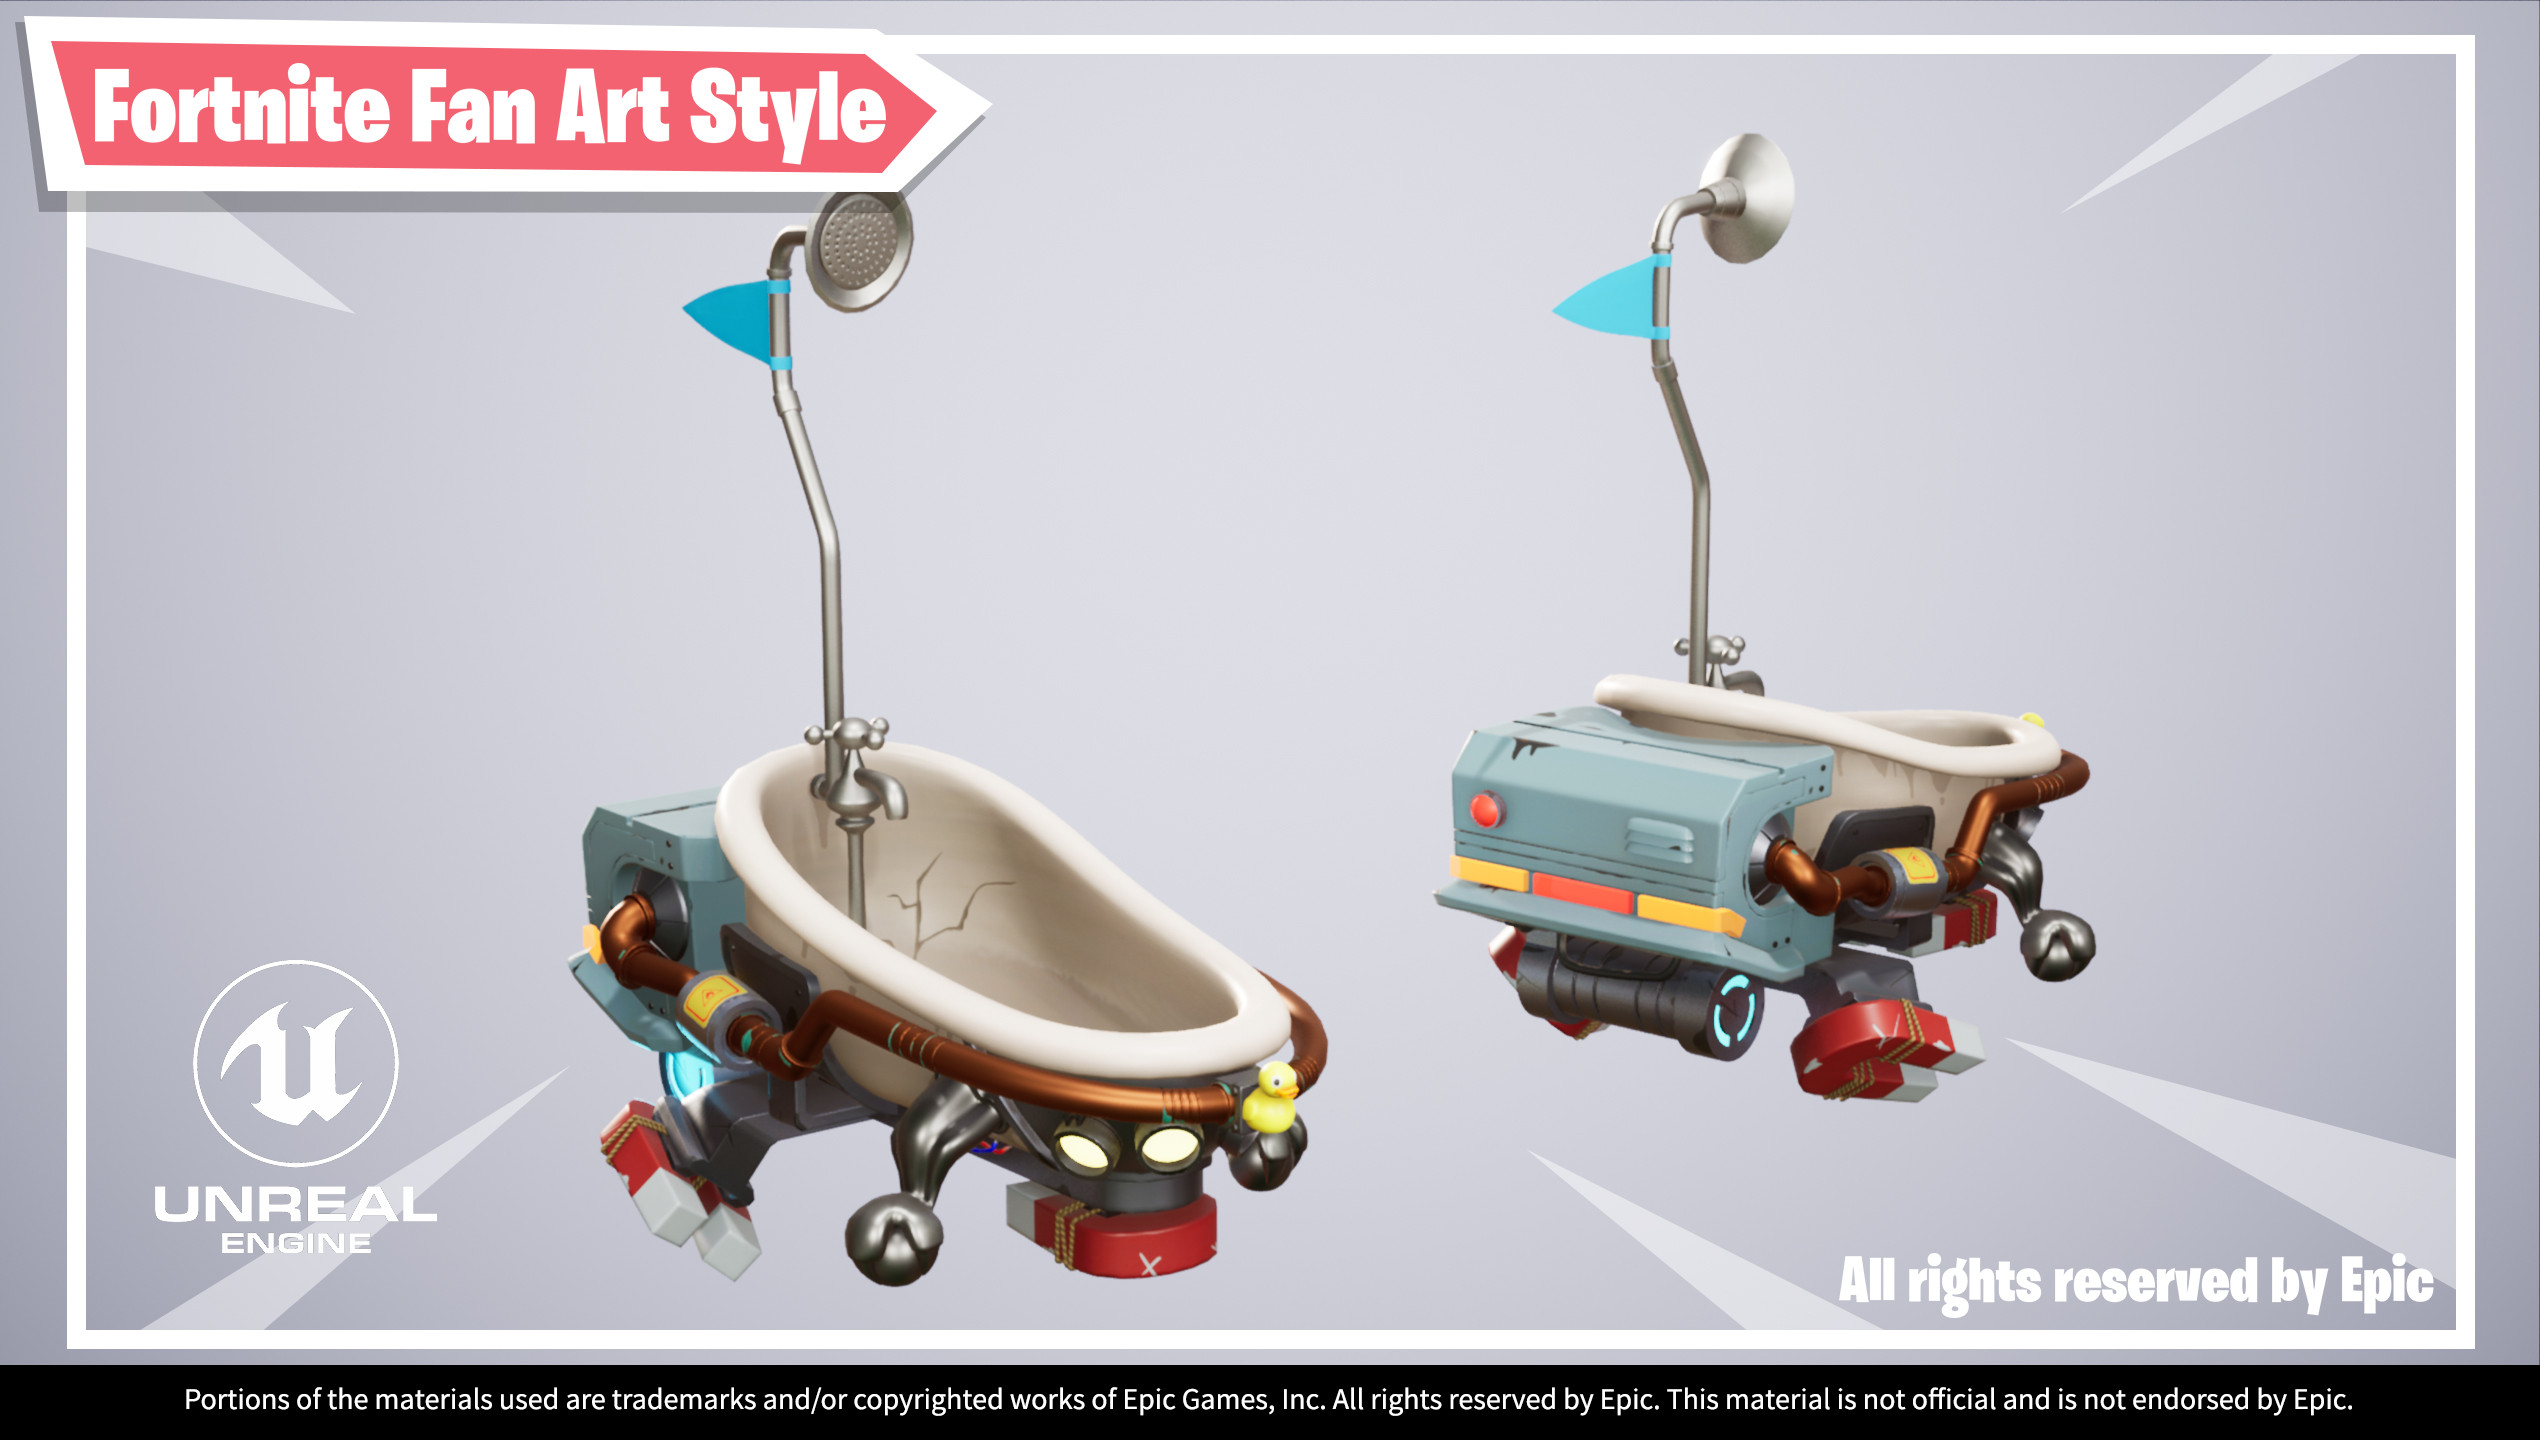 UE4 screenshot of Hover Bath Tub, multi angle view shot in grey background.

